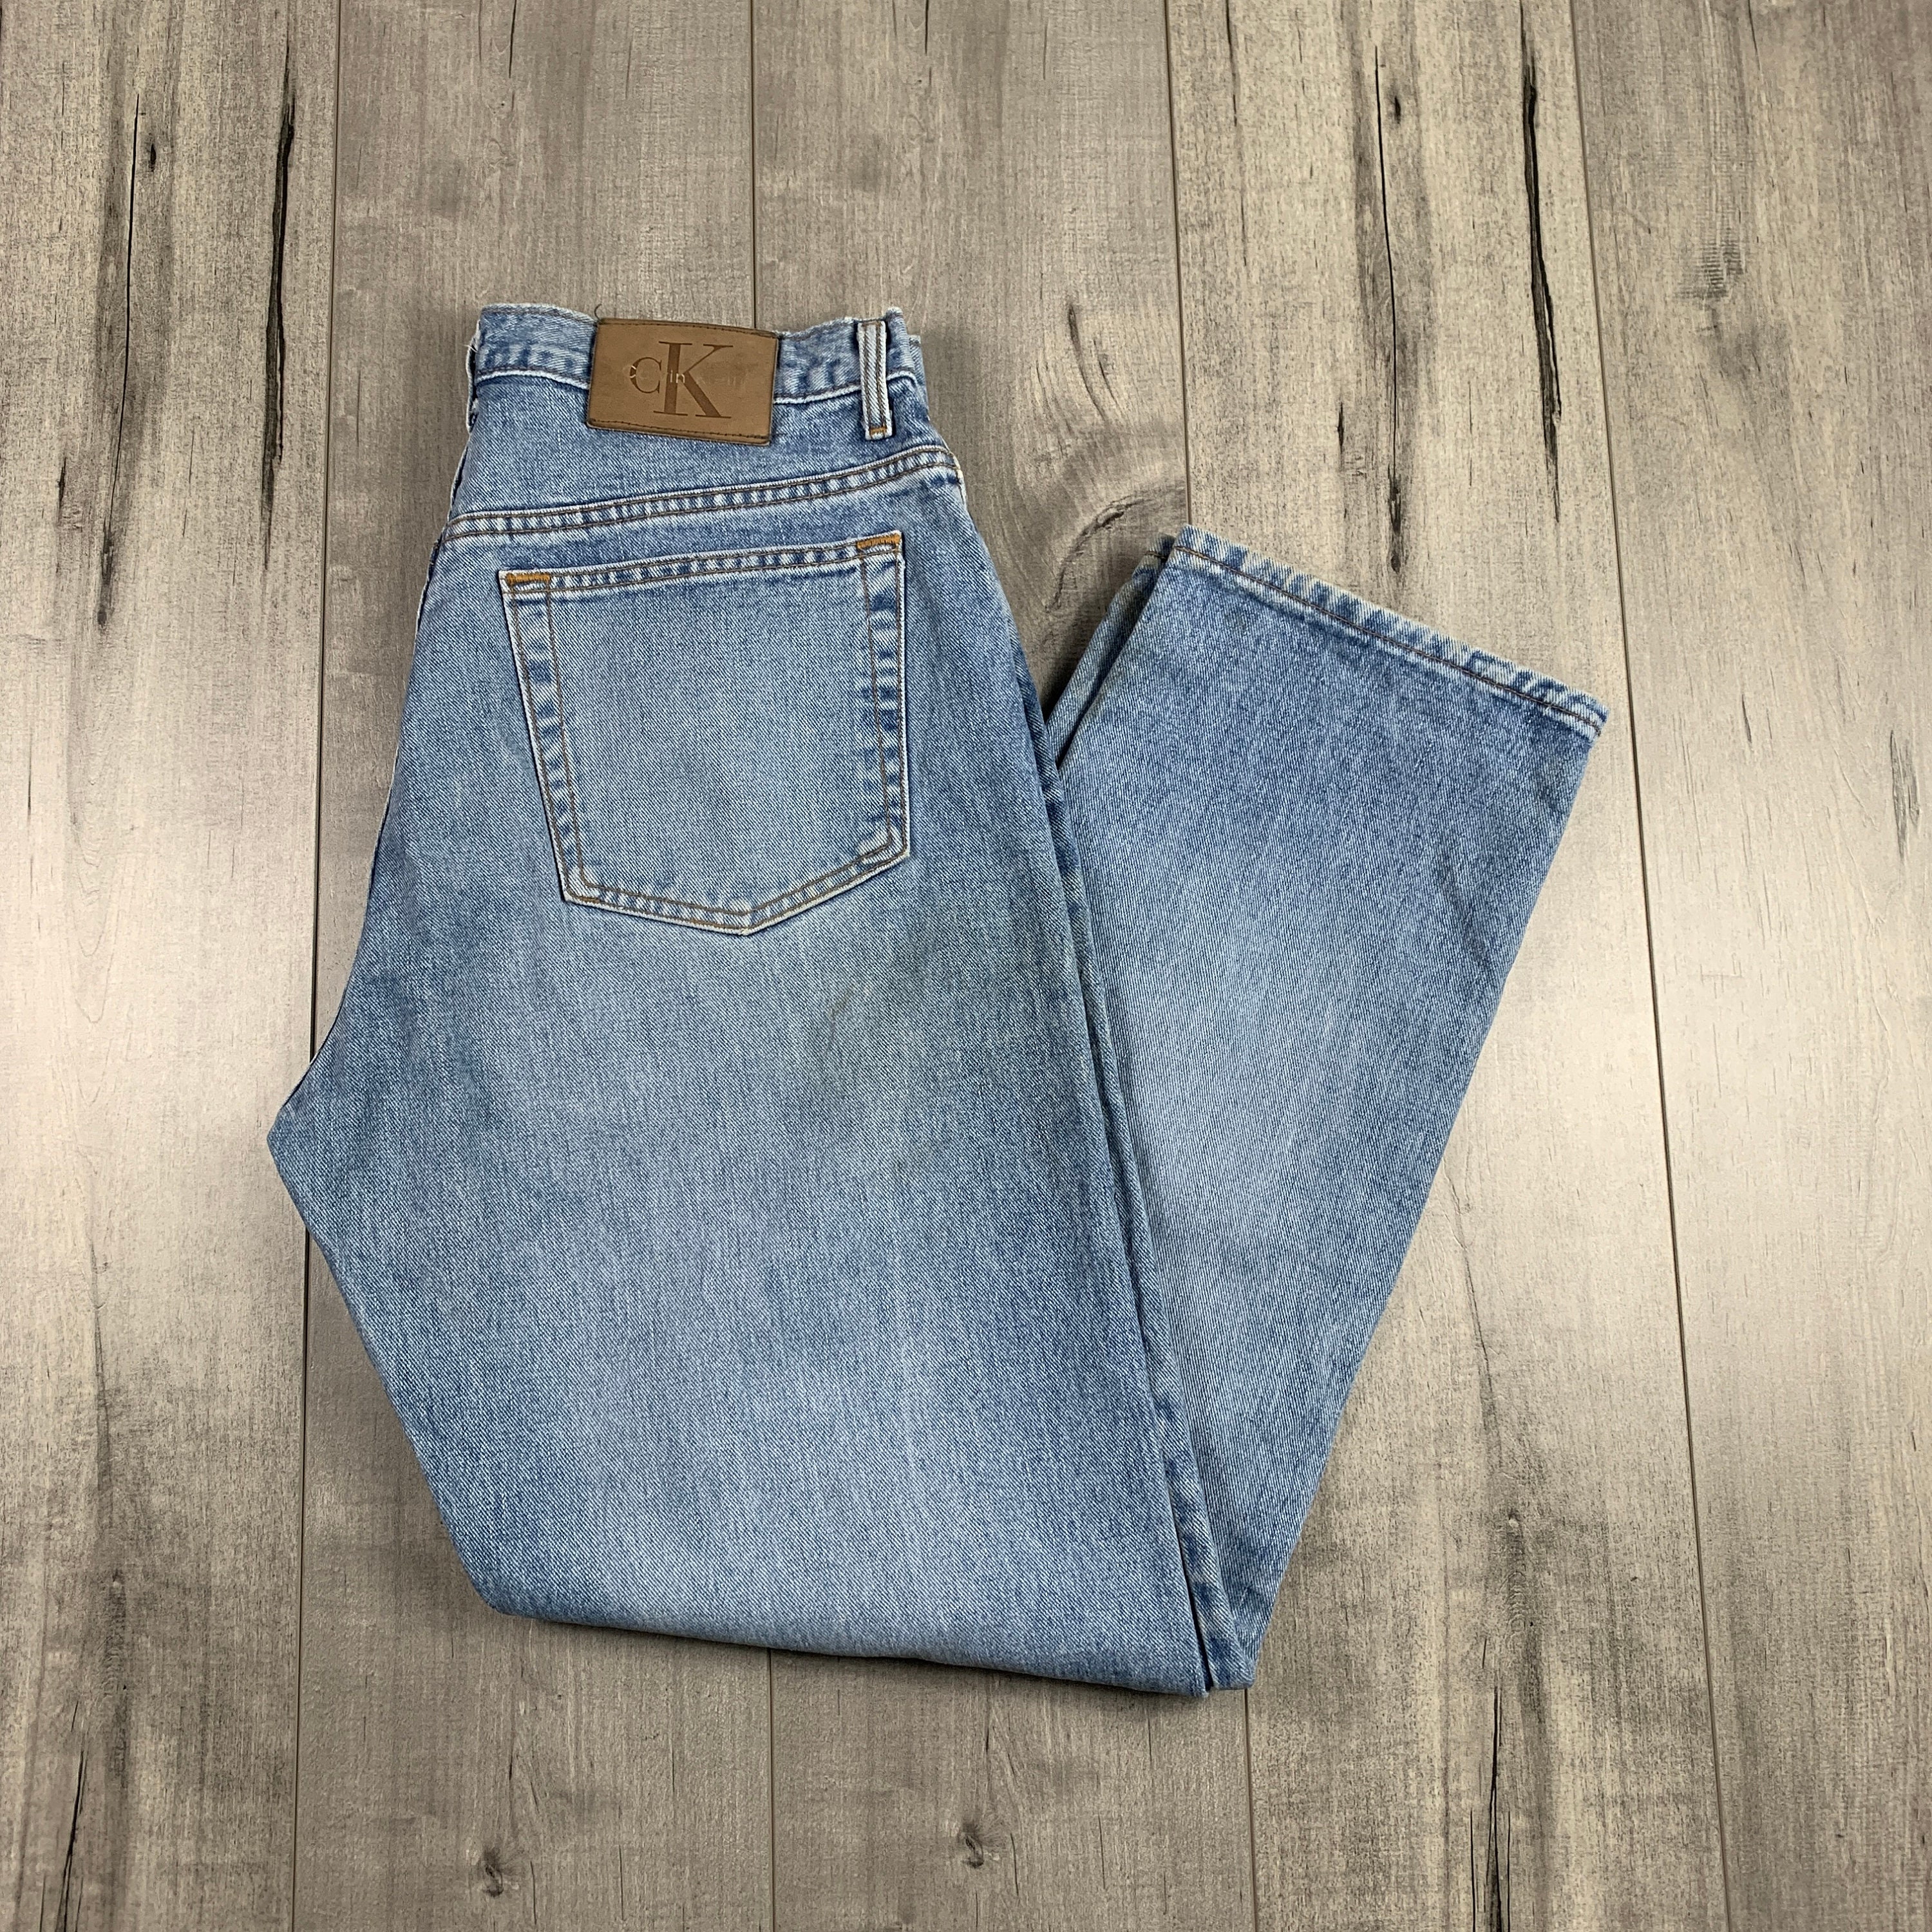 Ck Button Fly Jeans - Etsy